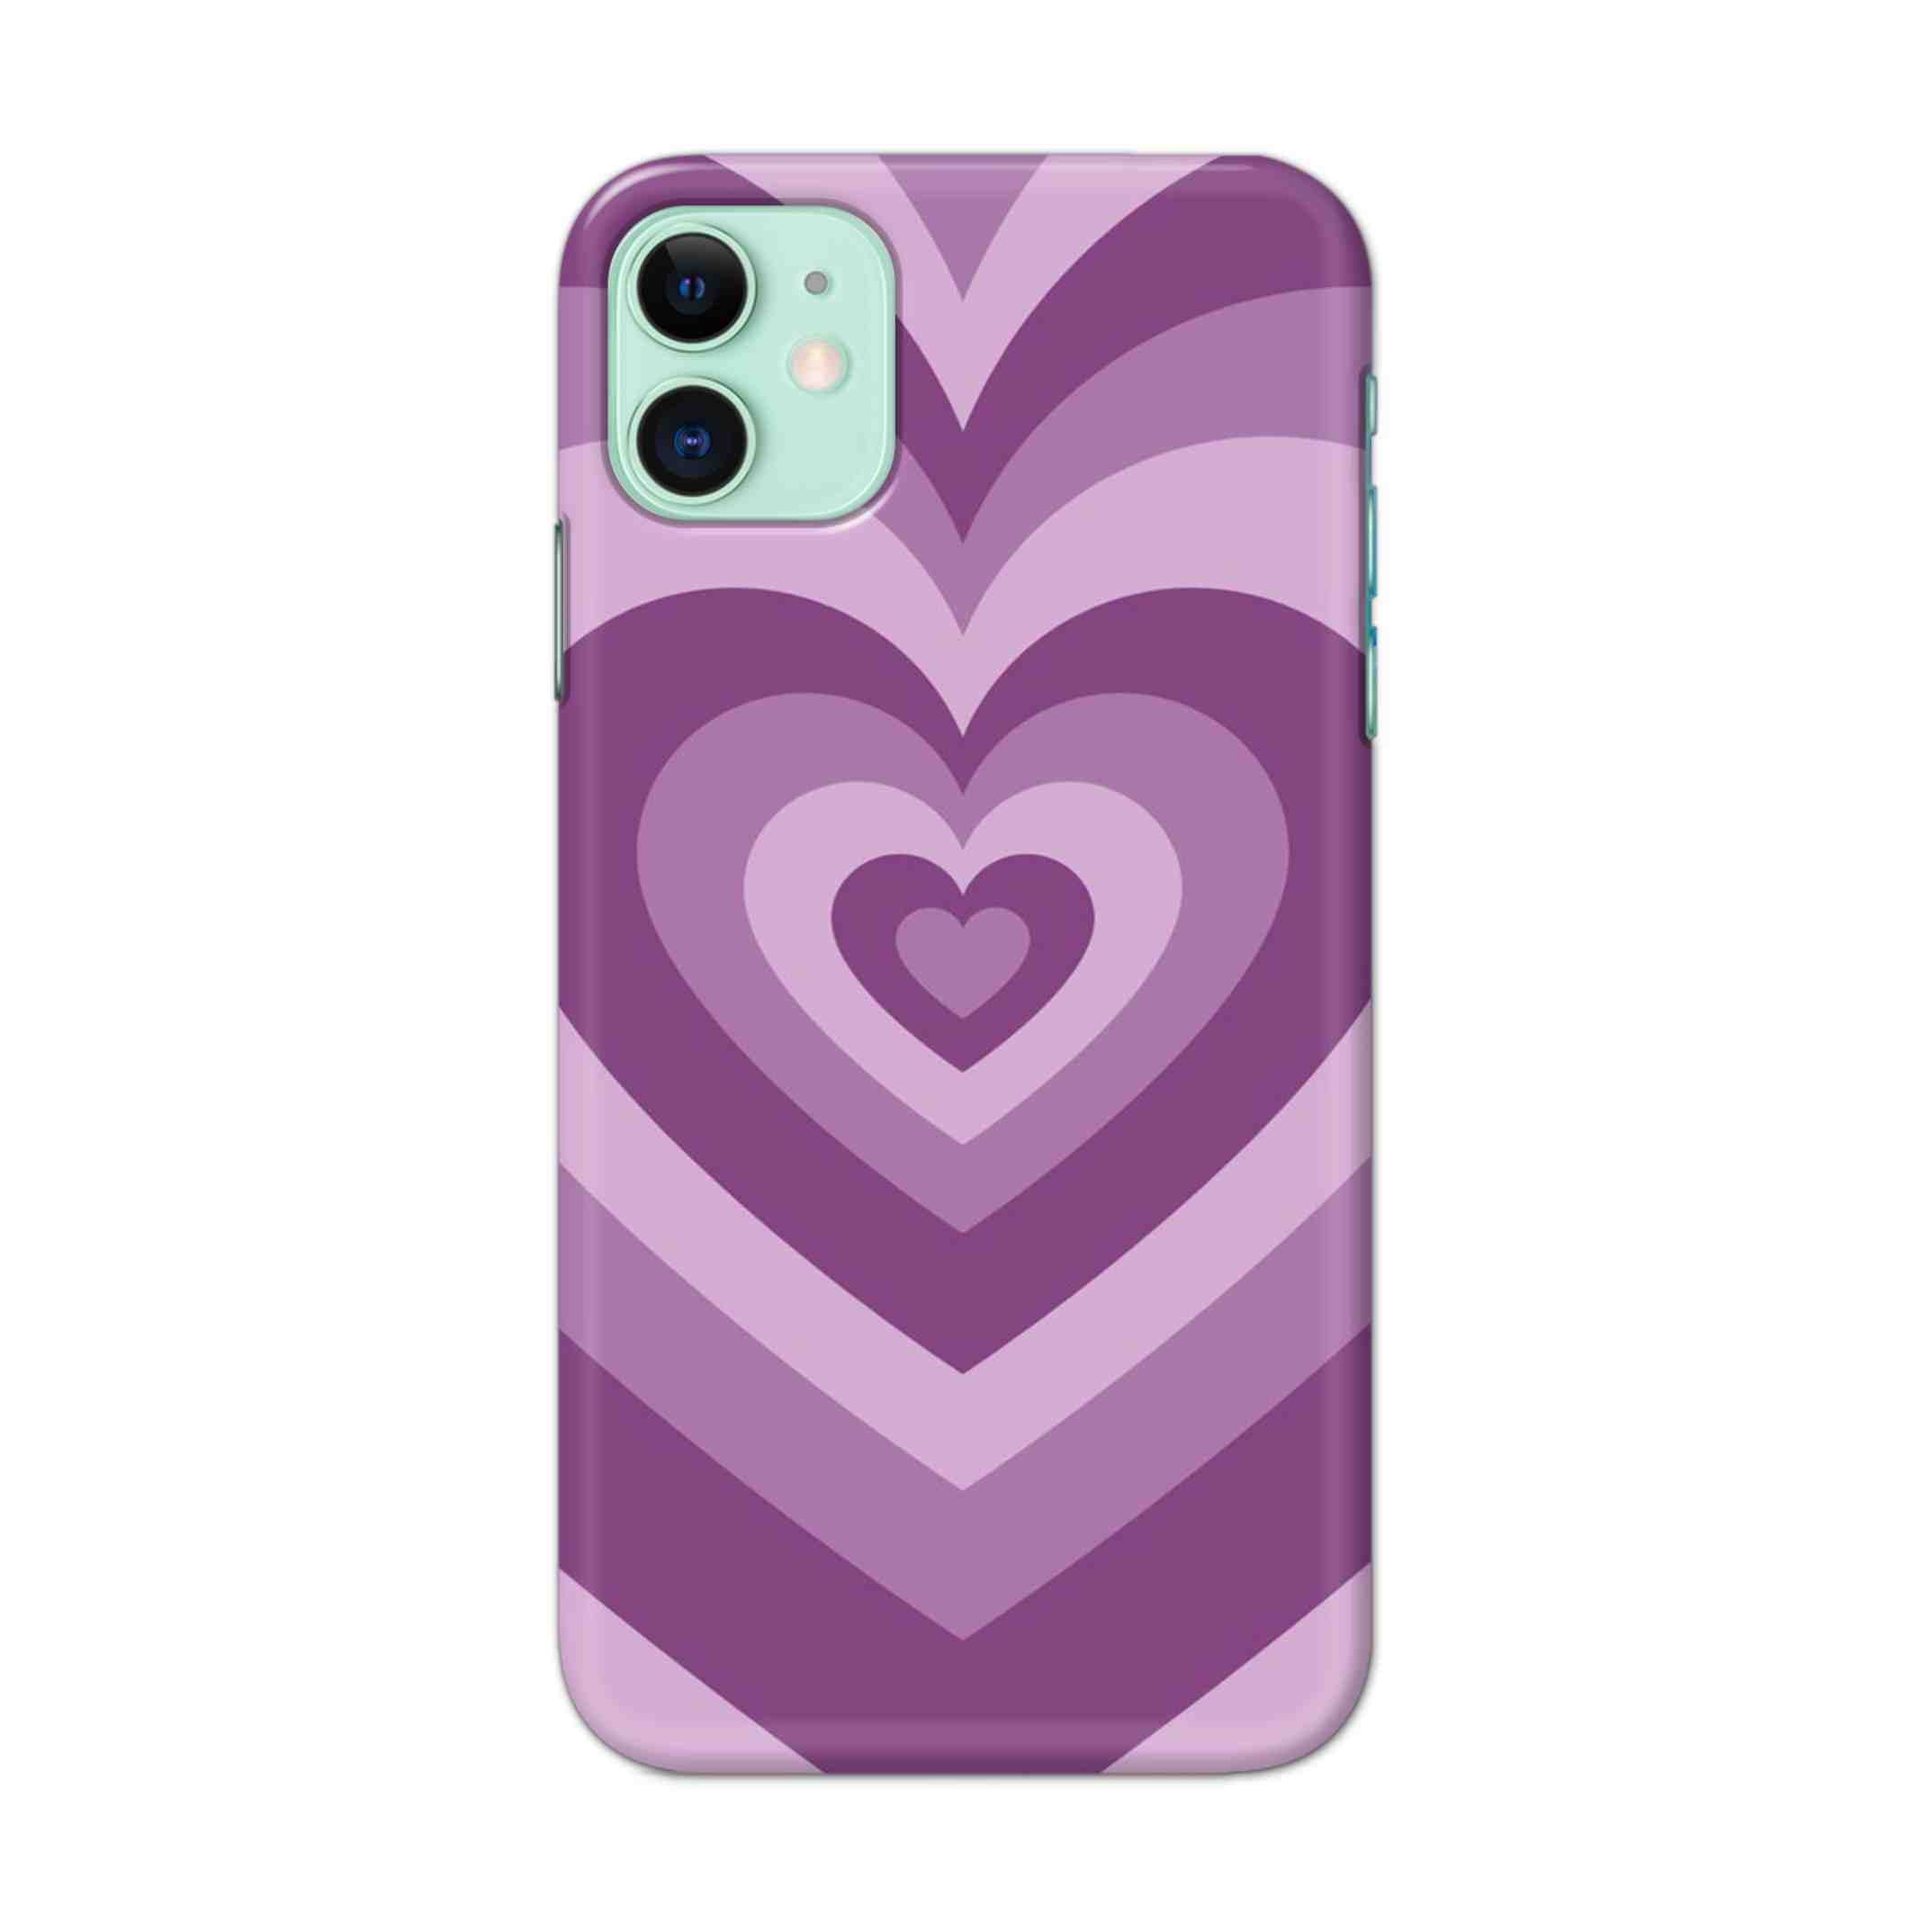 Buy Purple Heart Hard Back Mobile Phone Case Cover For iPhone 11 Online